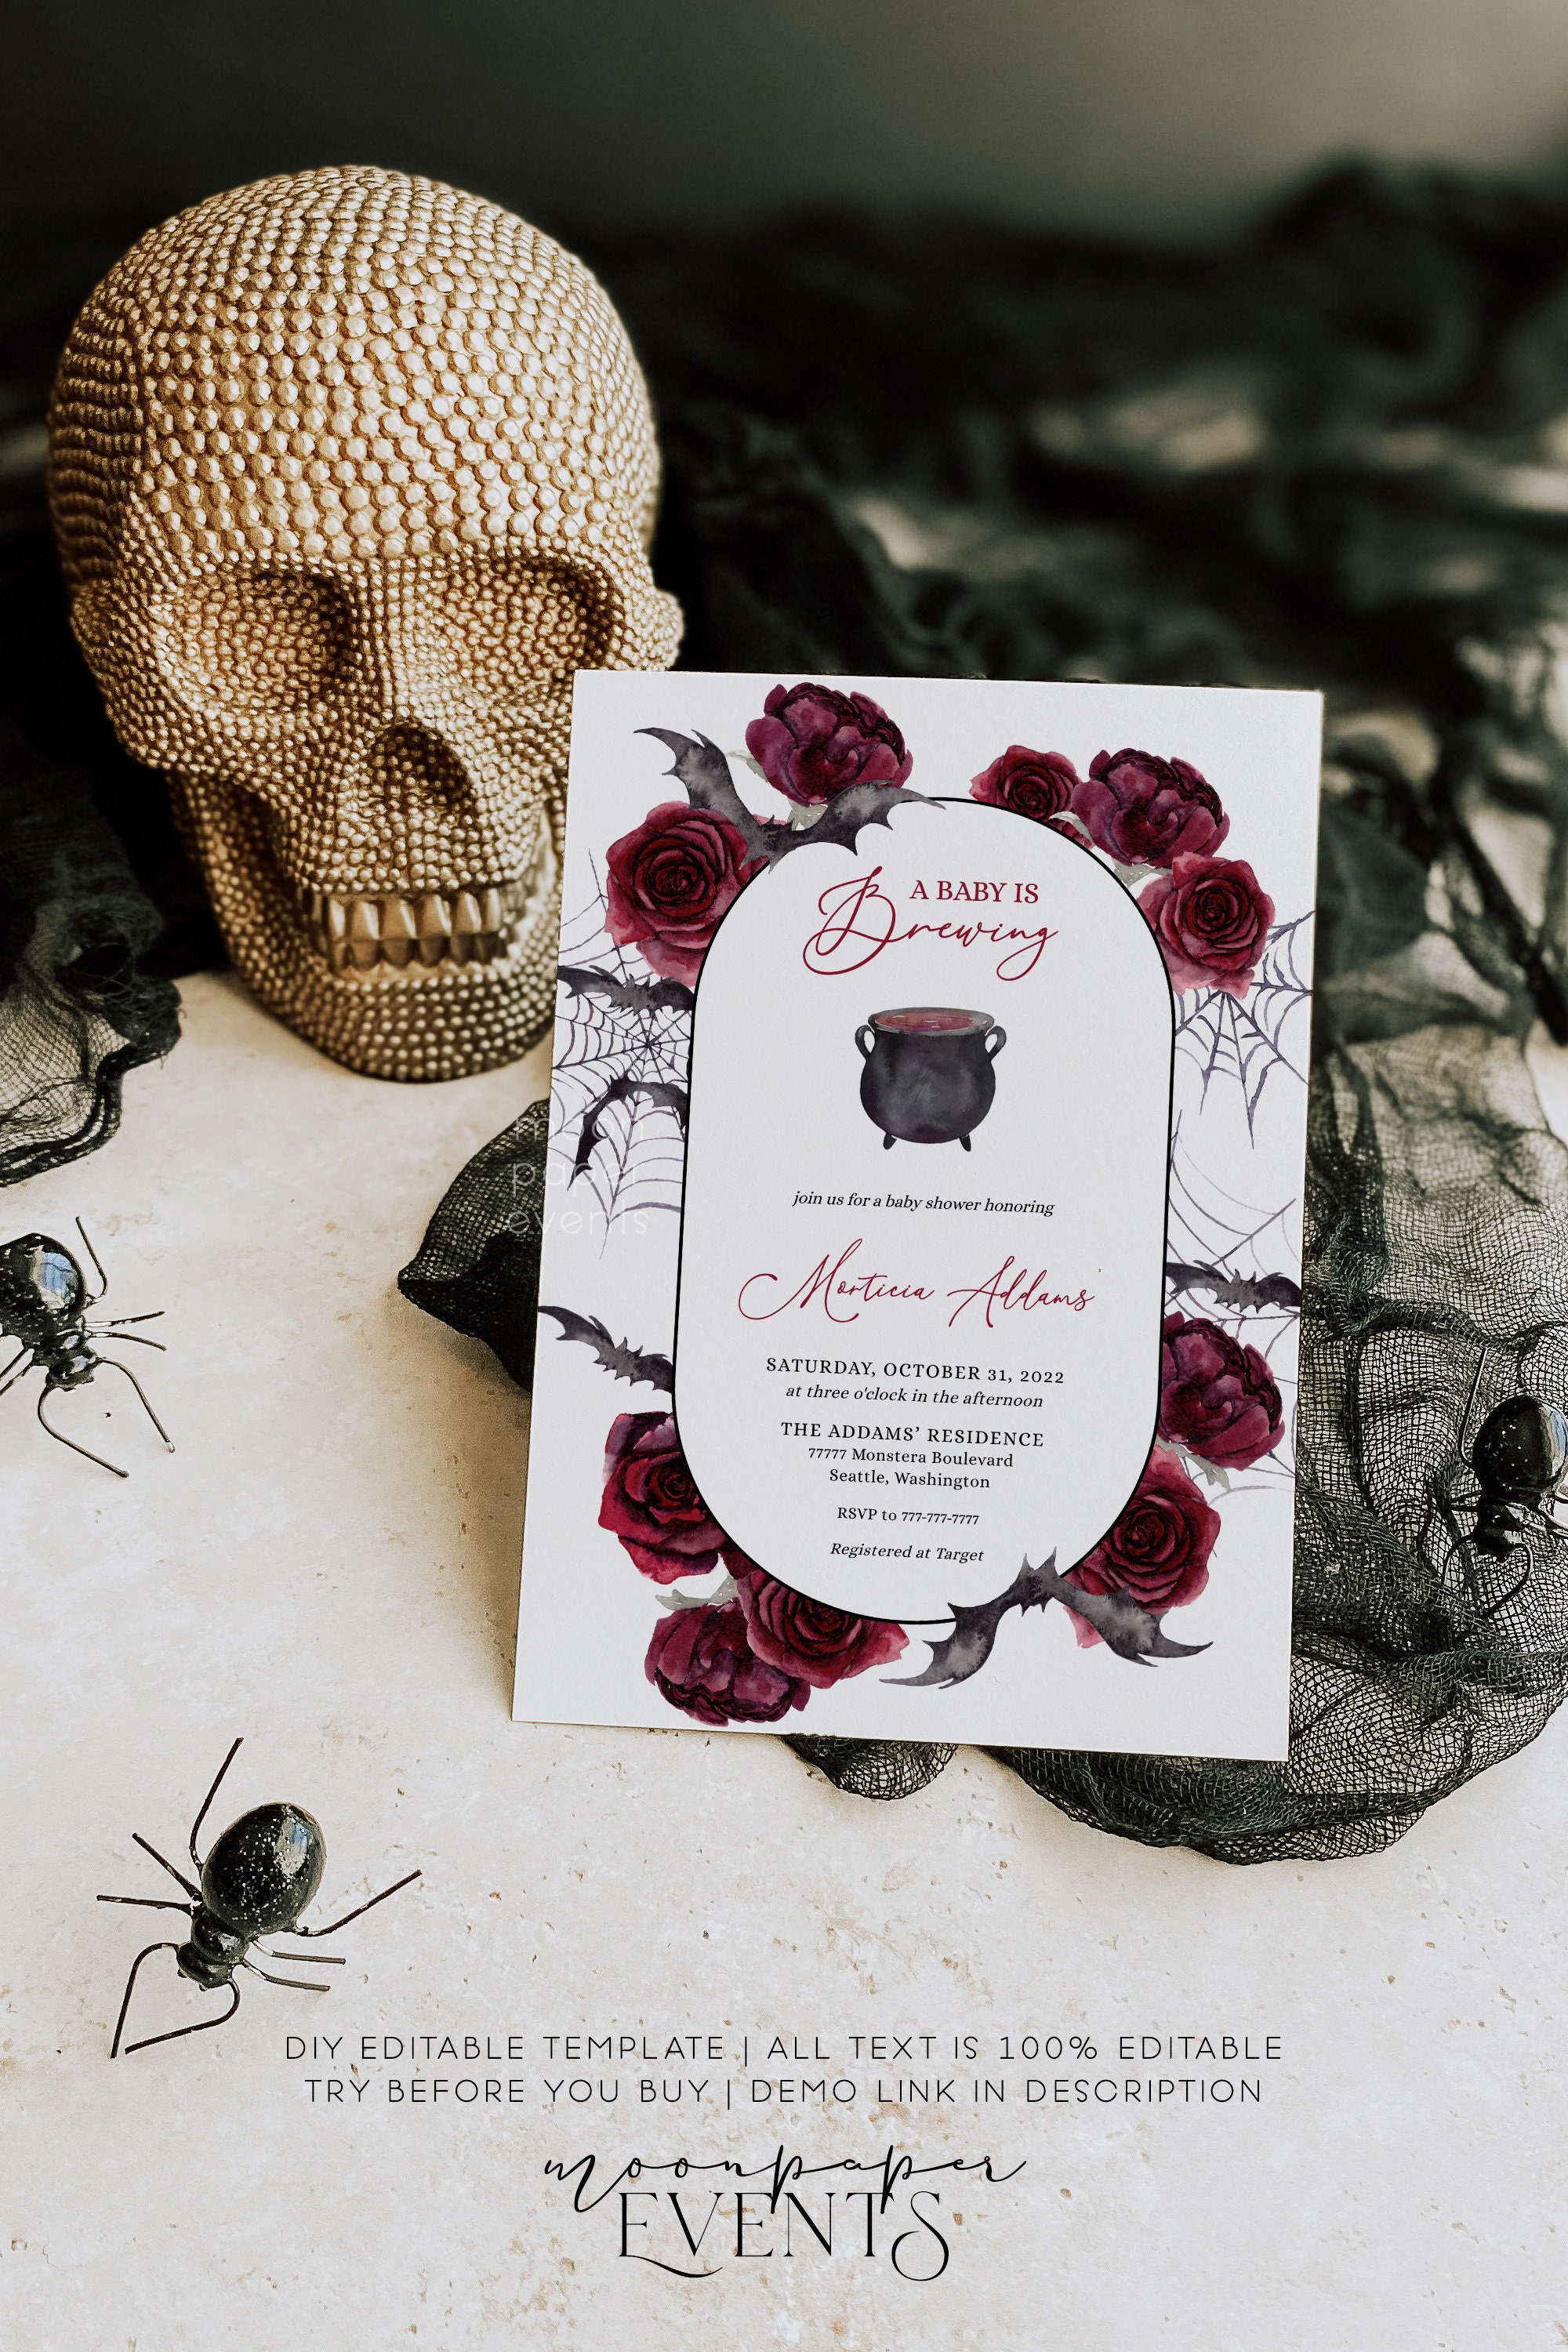 A Baby is Brewing Halloween Baby Shower Invitation Diy - Etsy